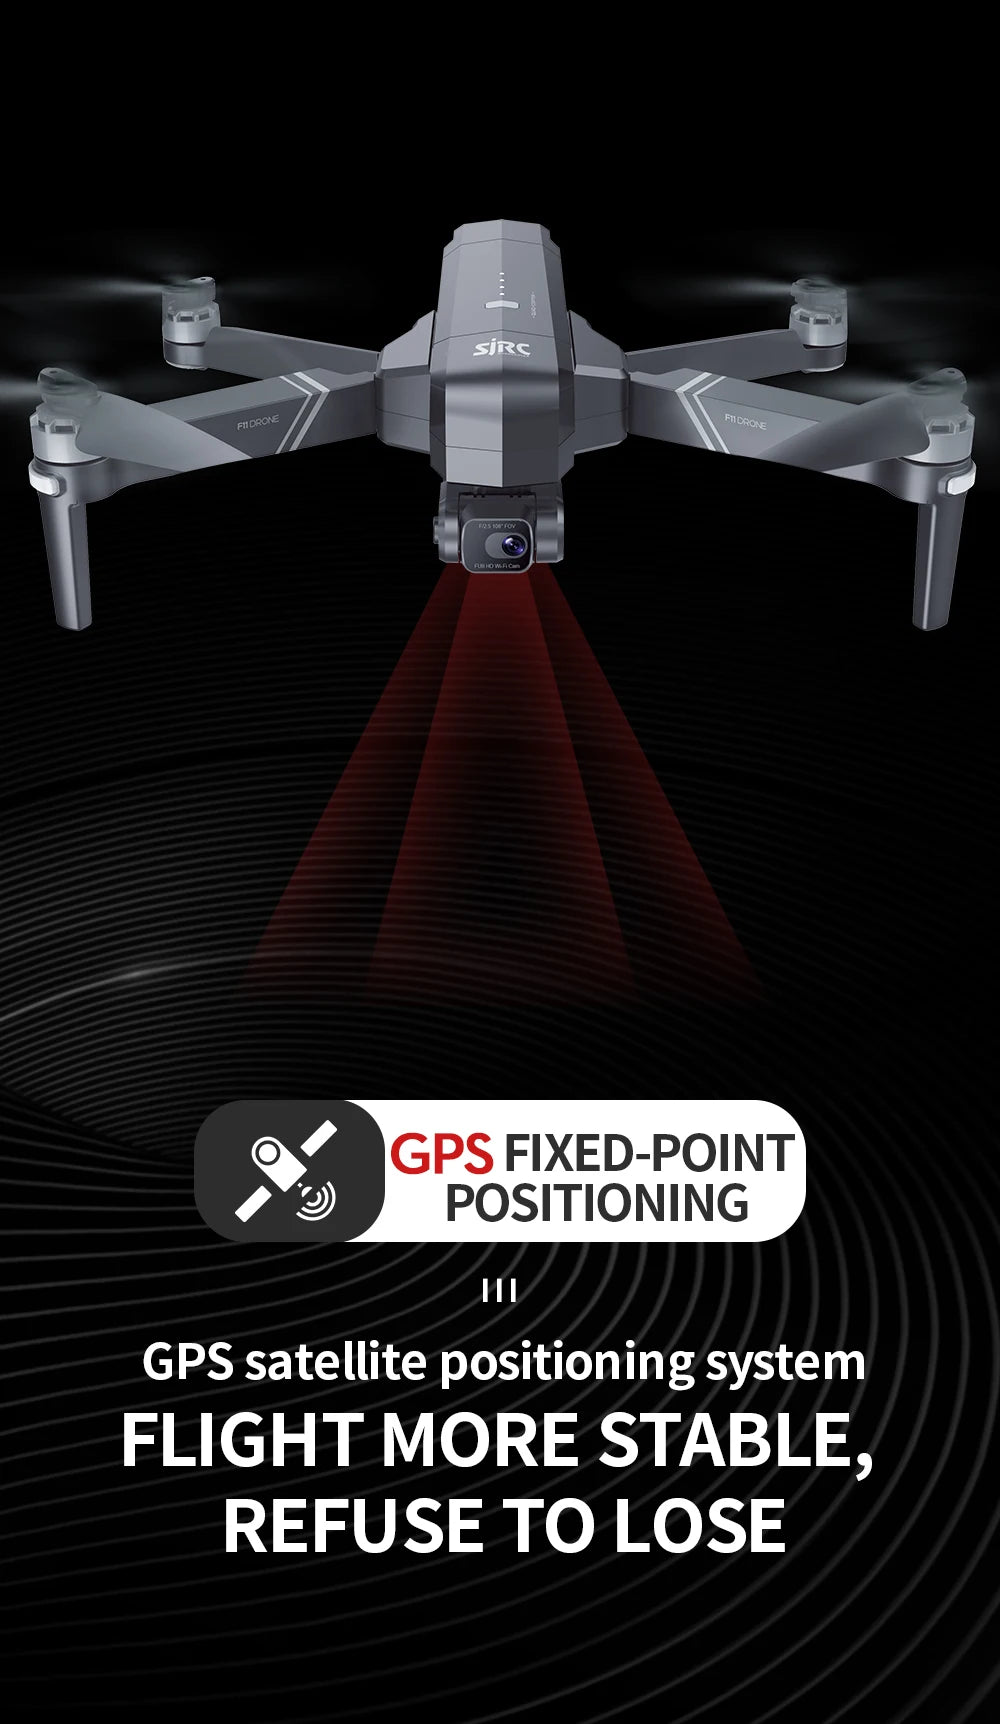 SJRC F11 / F11S  Pro Drone, sirc lld GPS FIXED-POINT POSITION